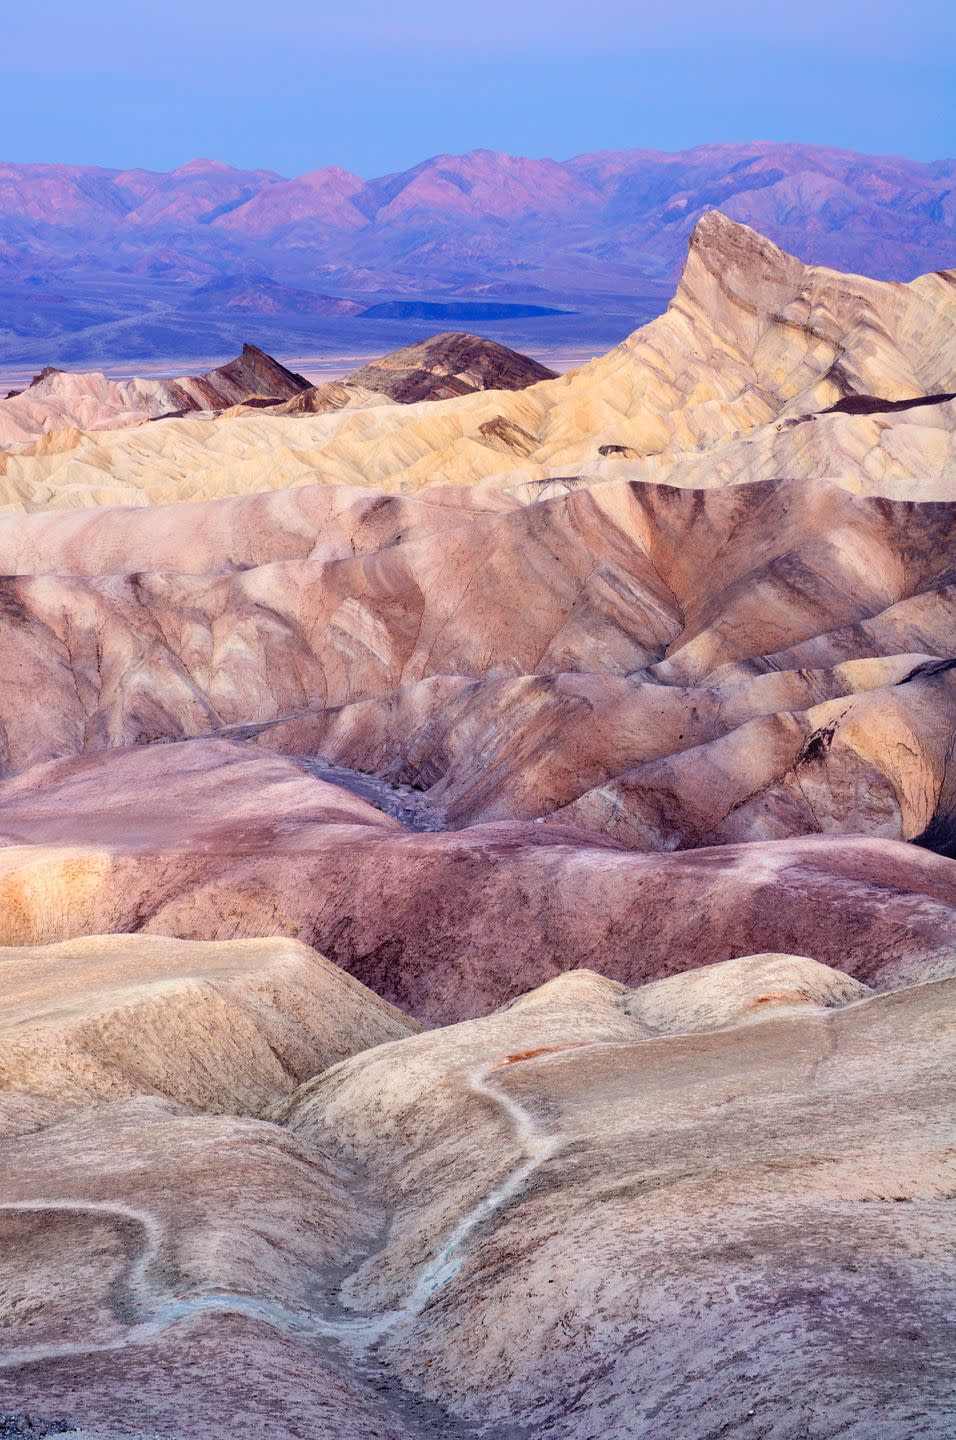 <p><strong>Where: </strong>Death Valley National Park, California</p><p><strong>Why We Love It: </strong>Located on the eastern border of California, Death Valley is America's lowest, hottest, and driest point. But that doesn't make watching the sunset from Zabriskie Point any less beautiful.</p>